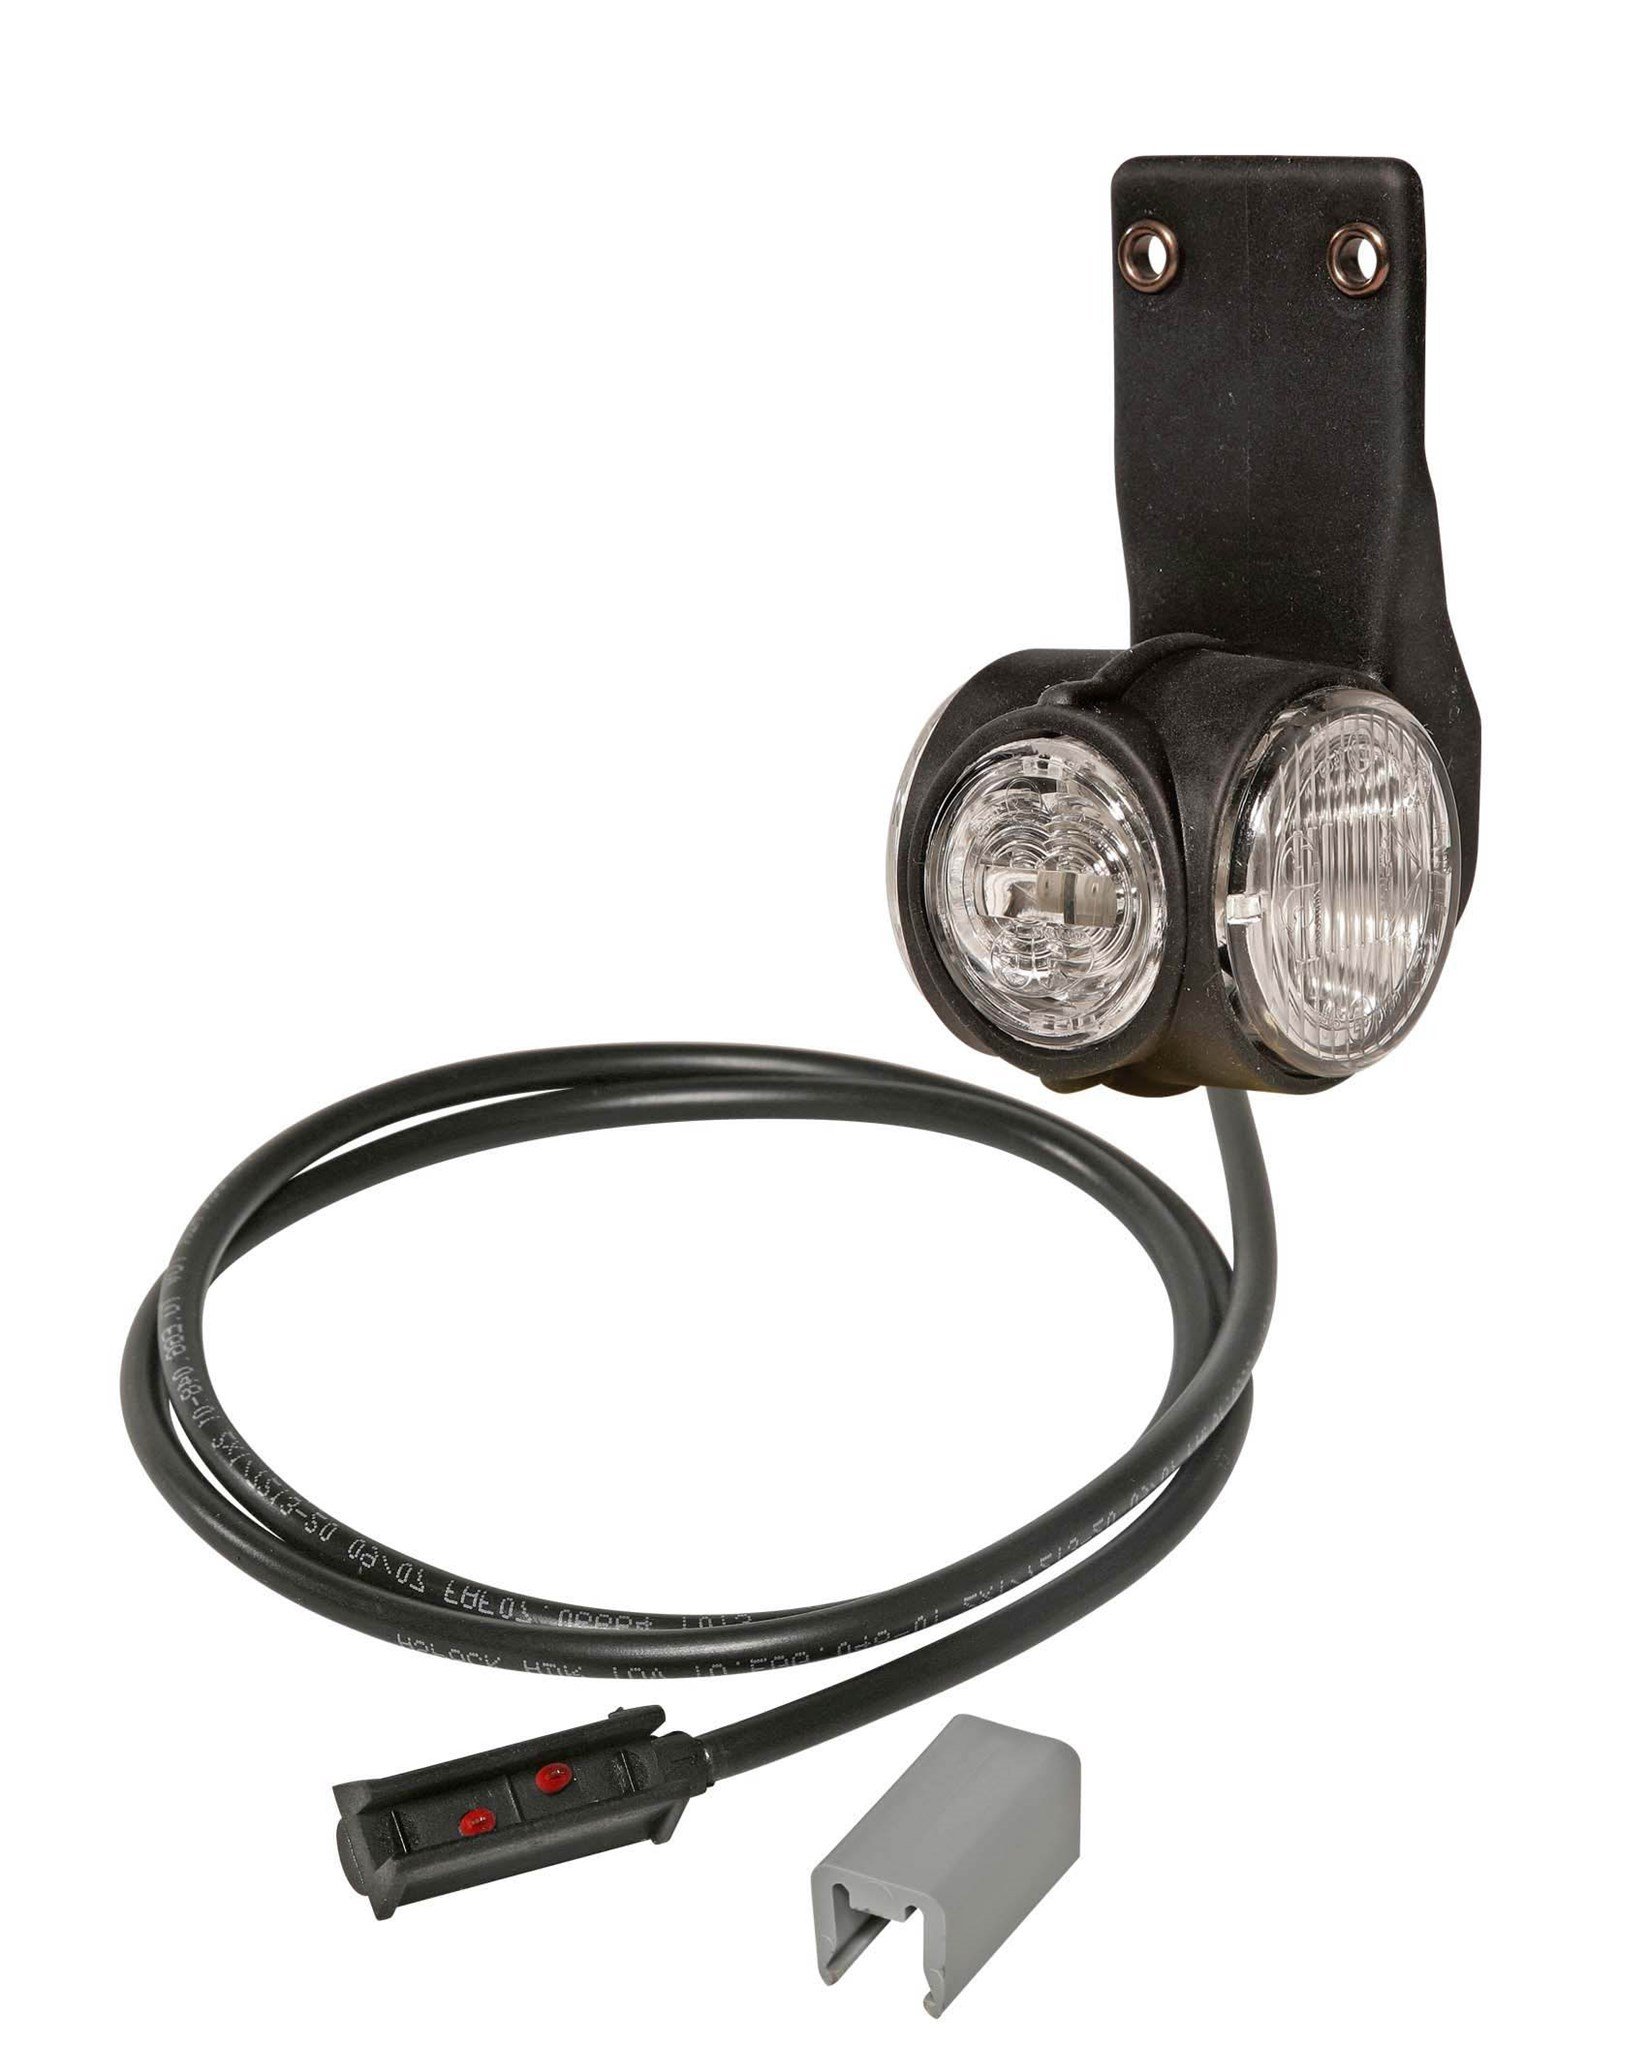 Picture of 31-3364-054 Aspöck Superpoint III links, Pendelhalter P&R 1,5 m ro/we/or, LED